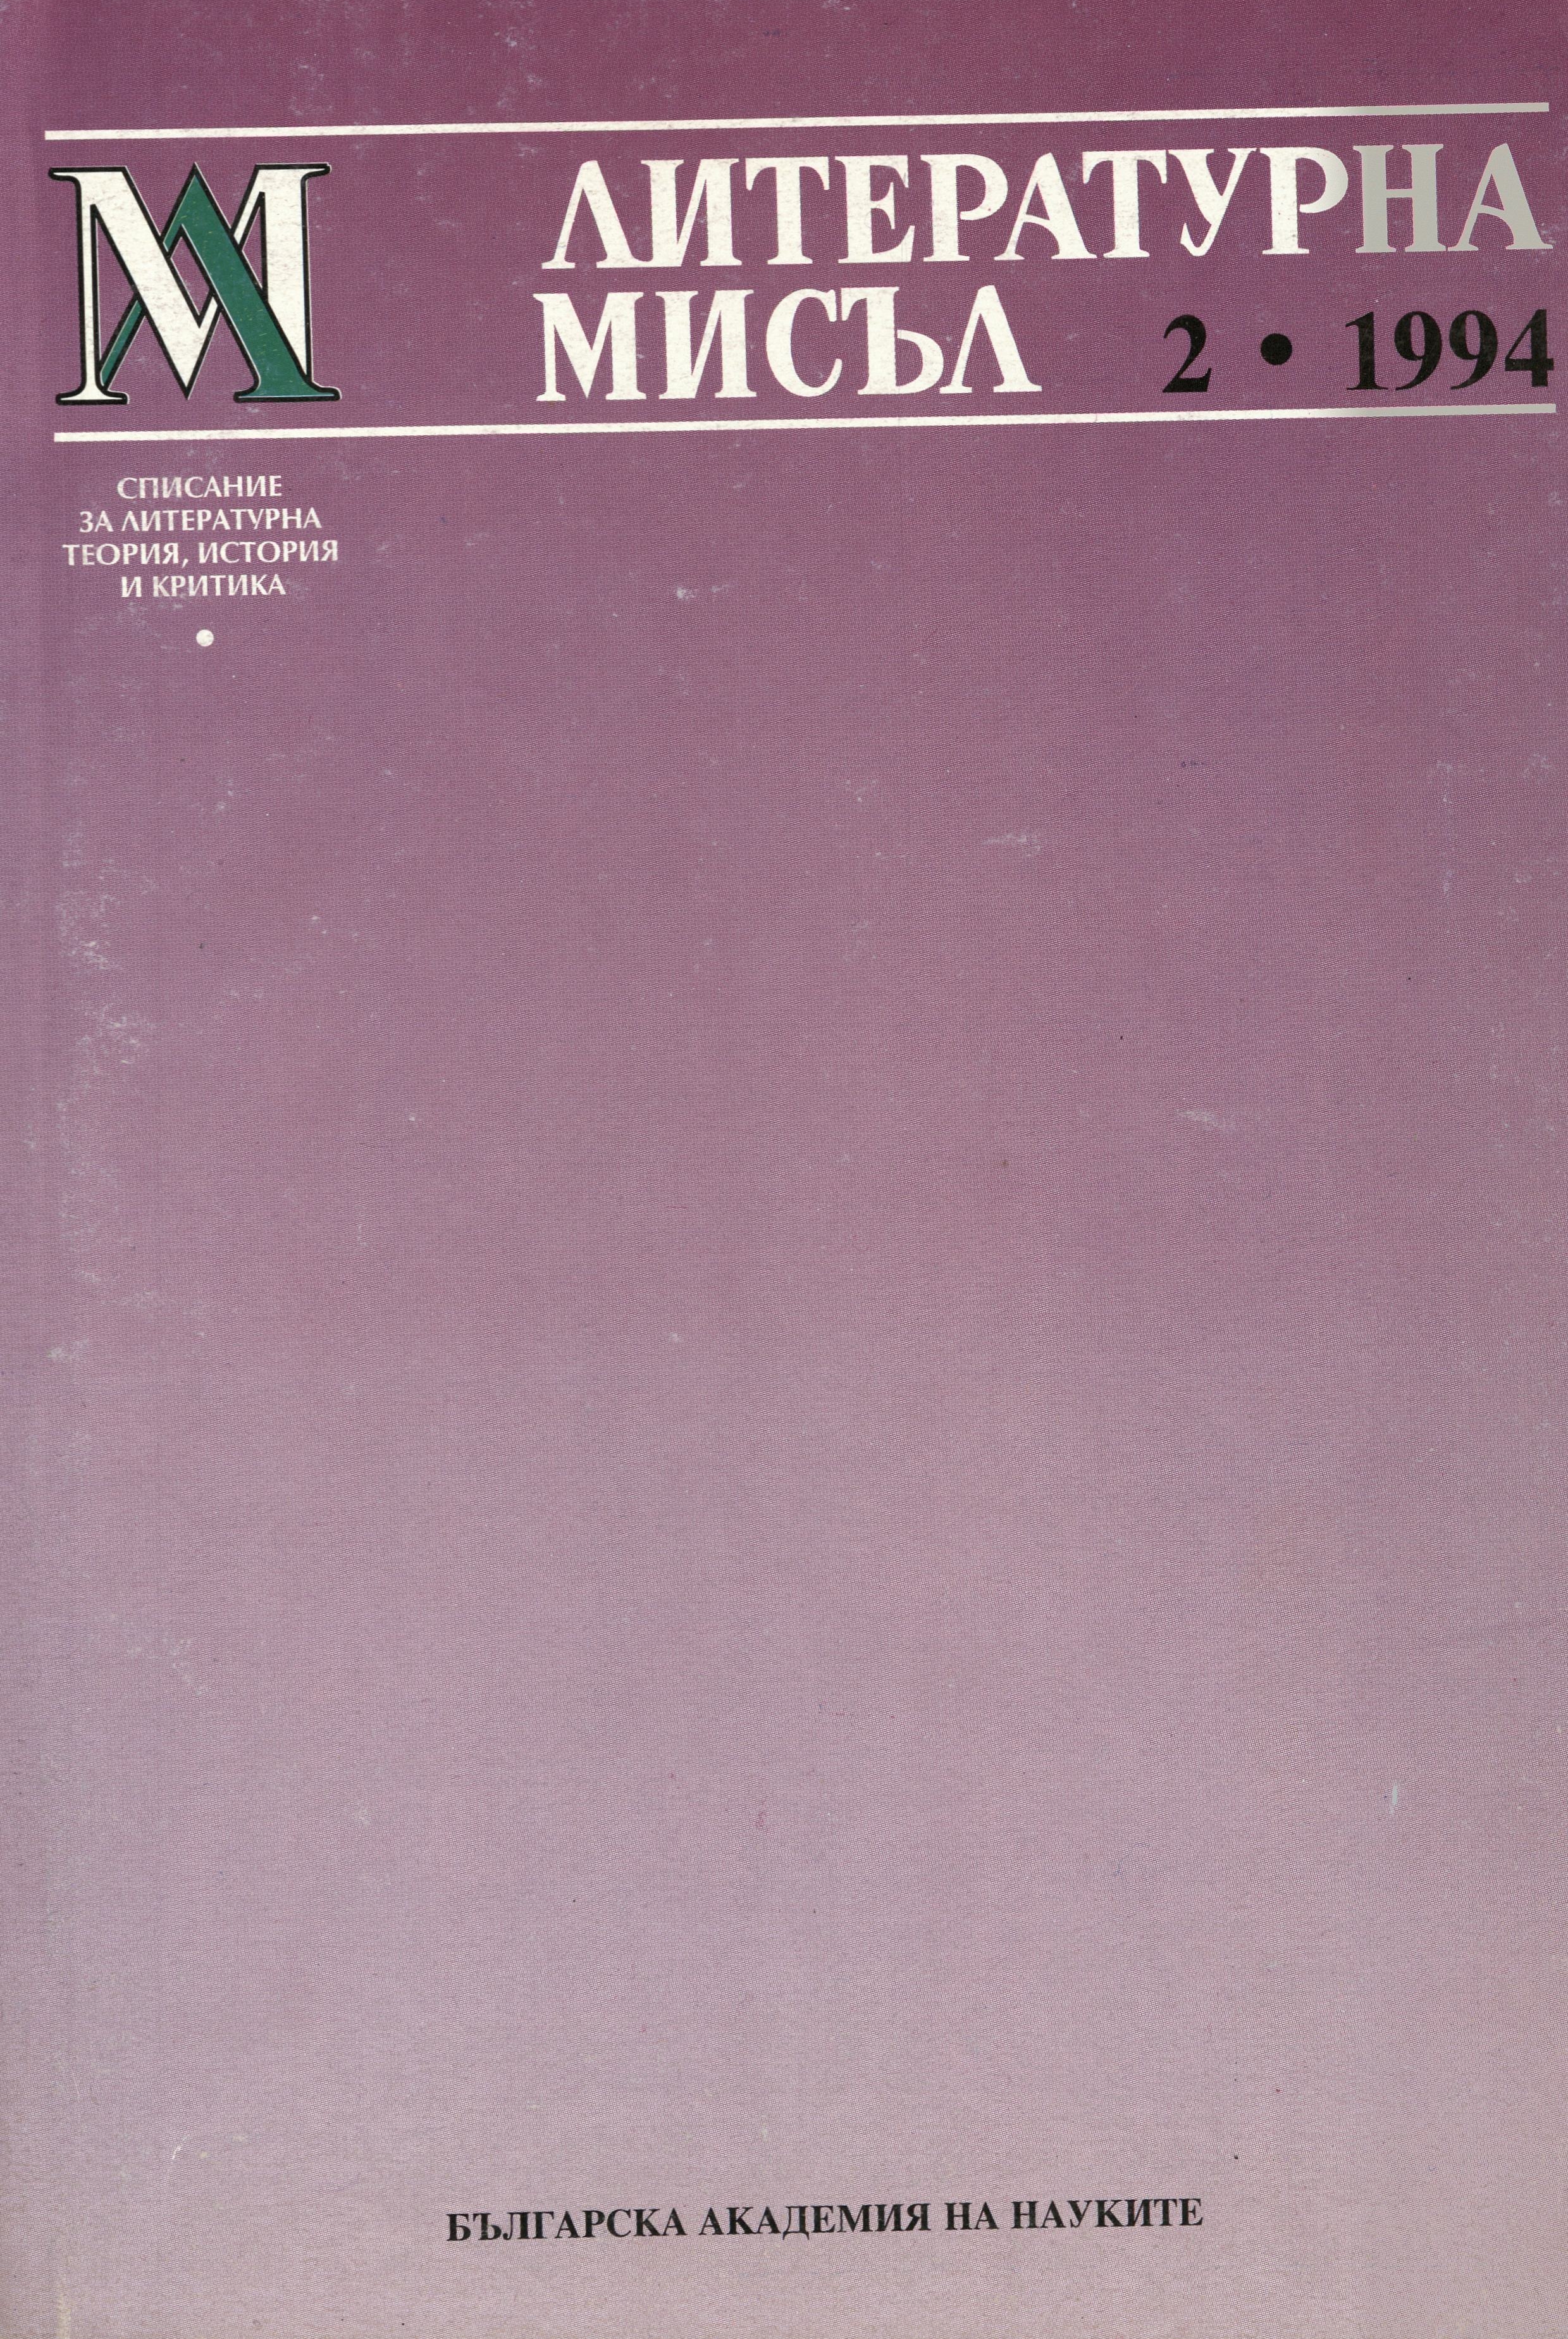 Issue 2, 1994